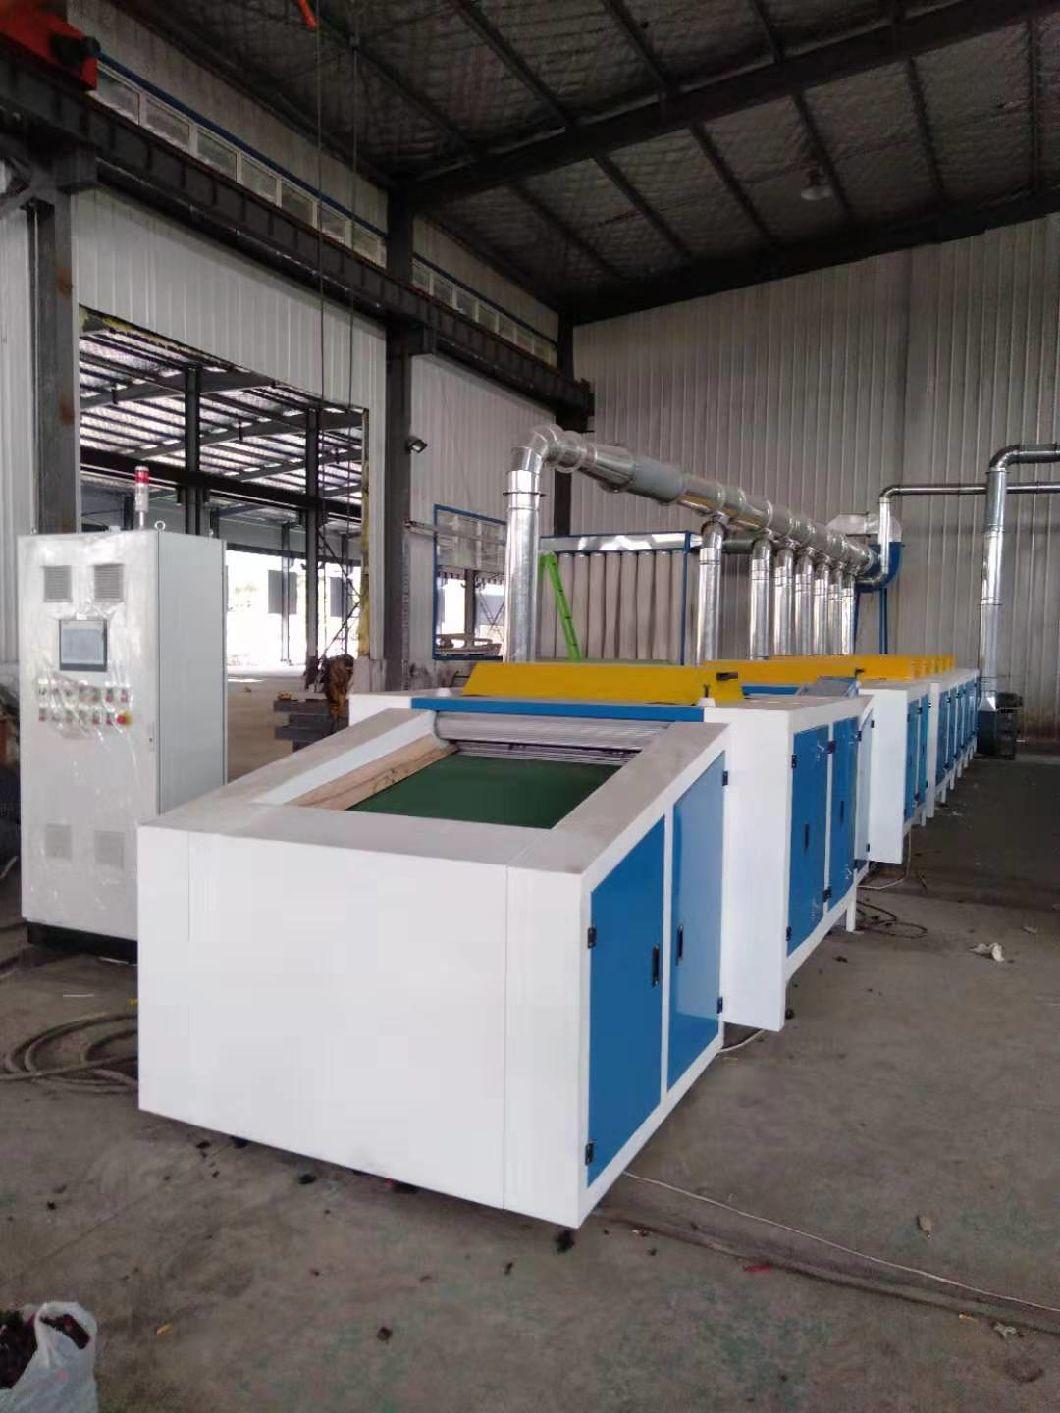 New Design High Output Cotton Waste Recycling Machine with Cover Iron Roller